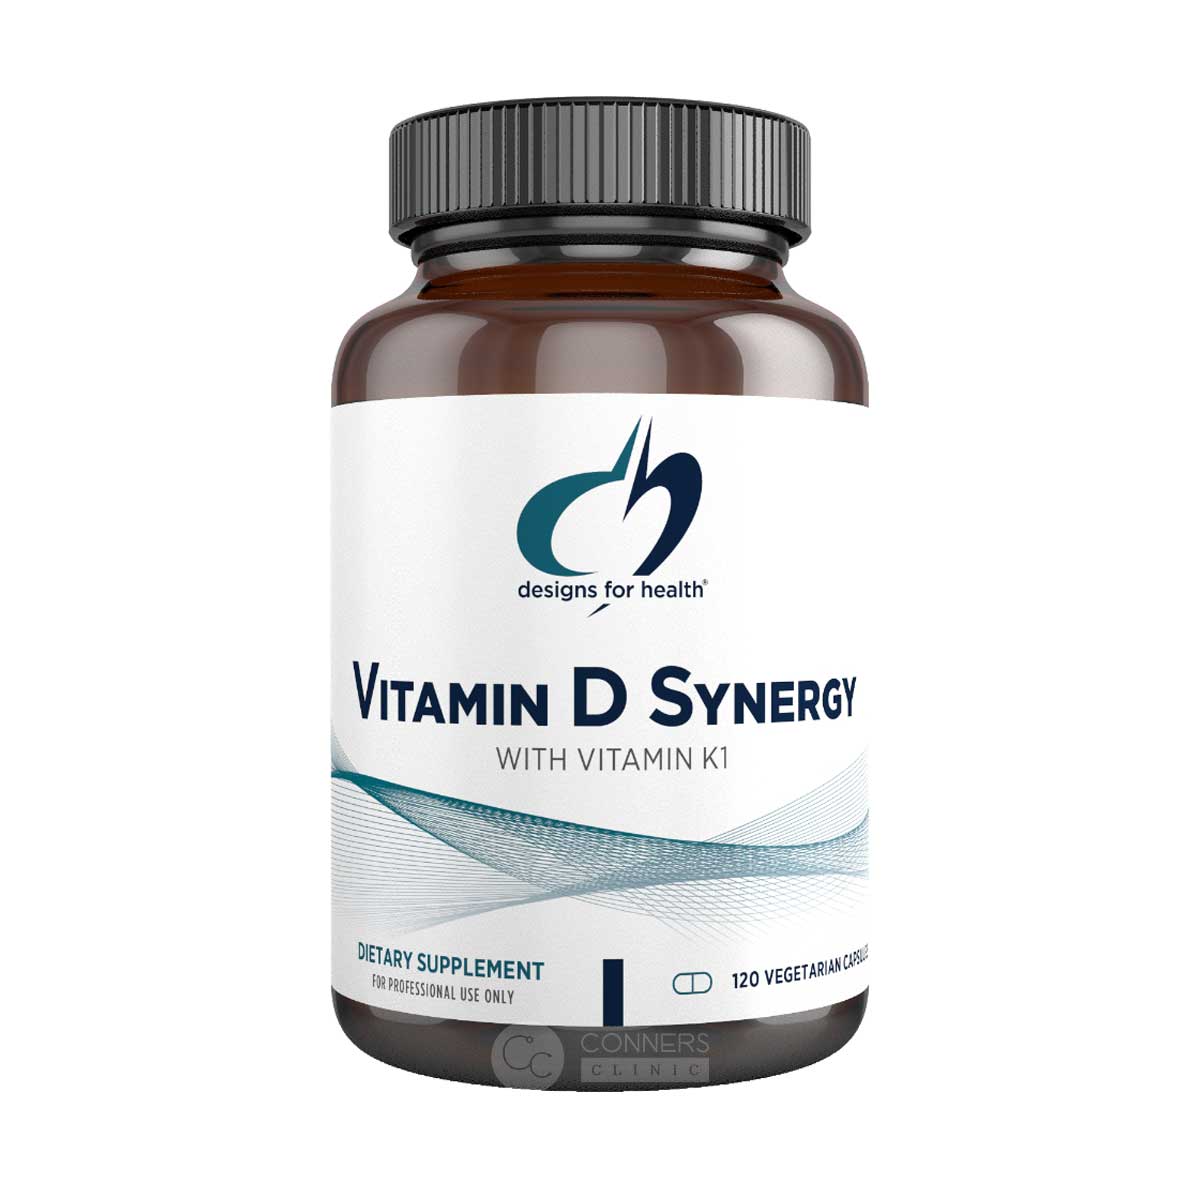 Vitamin D Synergy with Vitamin K Designs for Health Supplement - Conners Clinic